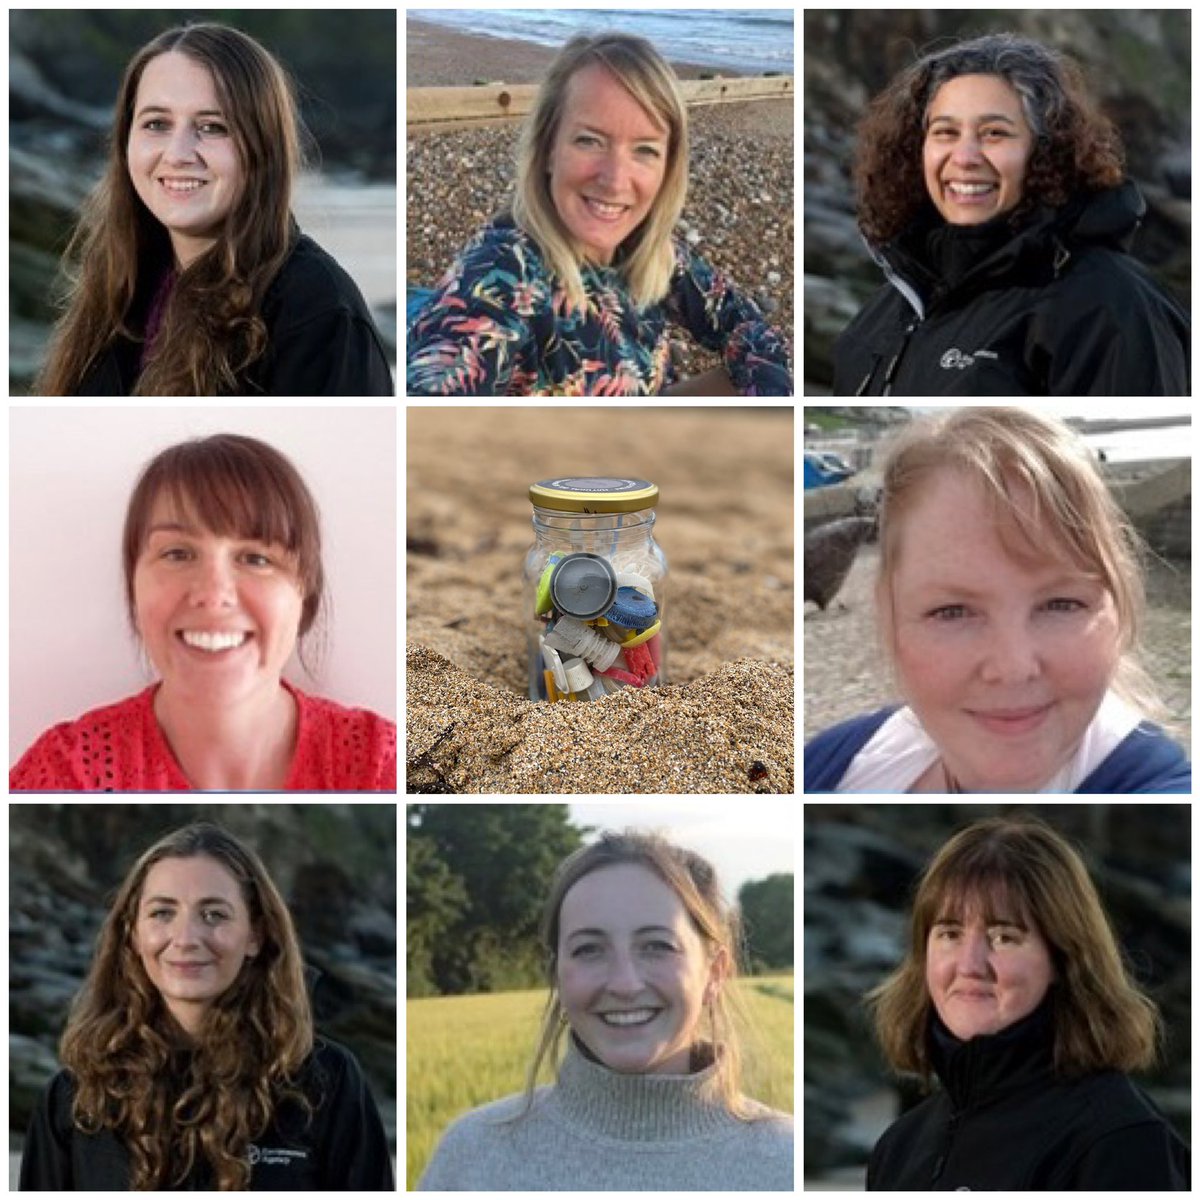 On #InternationalWomensDay I wanted to highlight the amazing work of all the women in my team protecting the environment from #plasticpollution @EnvAgency @Plastic_EU